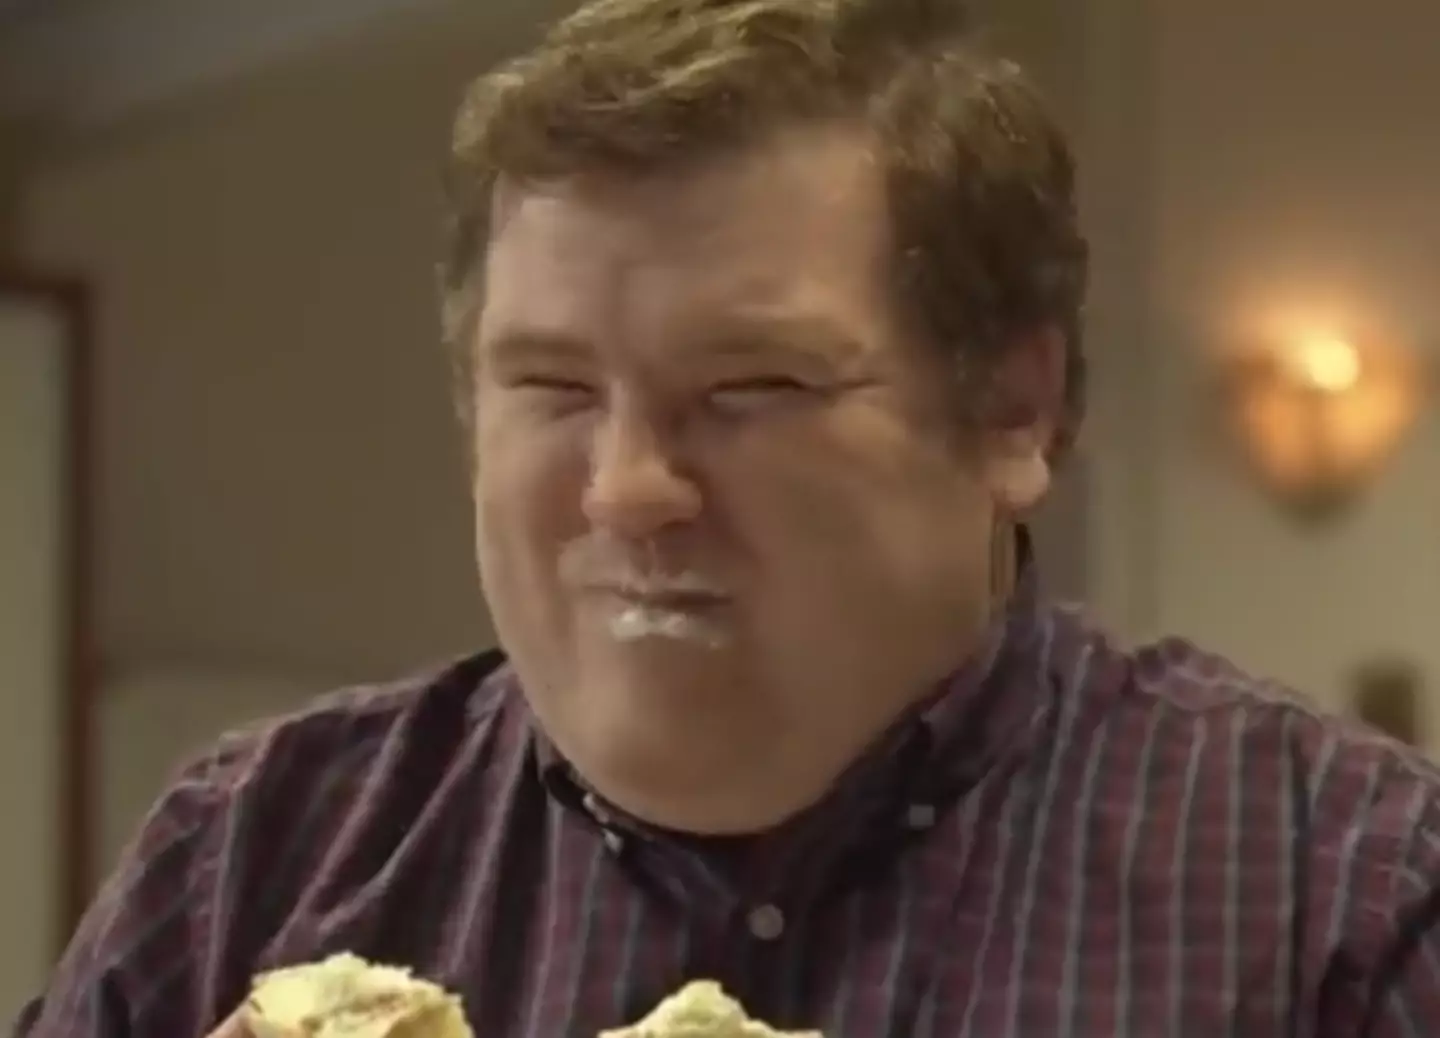 Lawrence had to eat so much cake during the scenes.